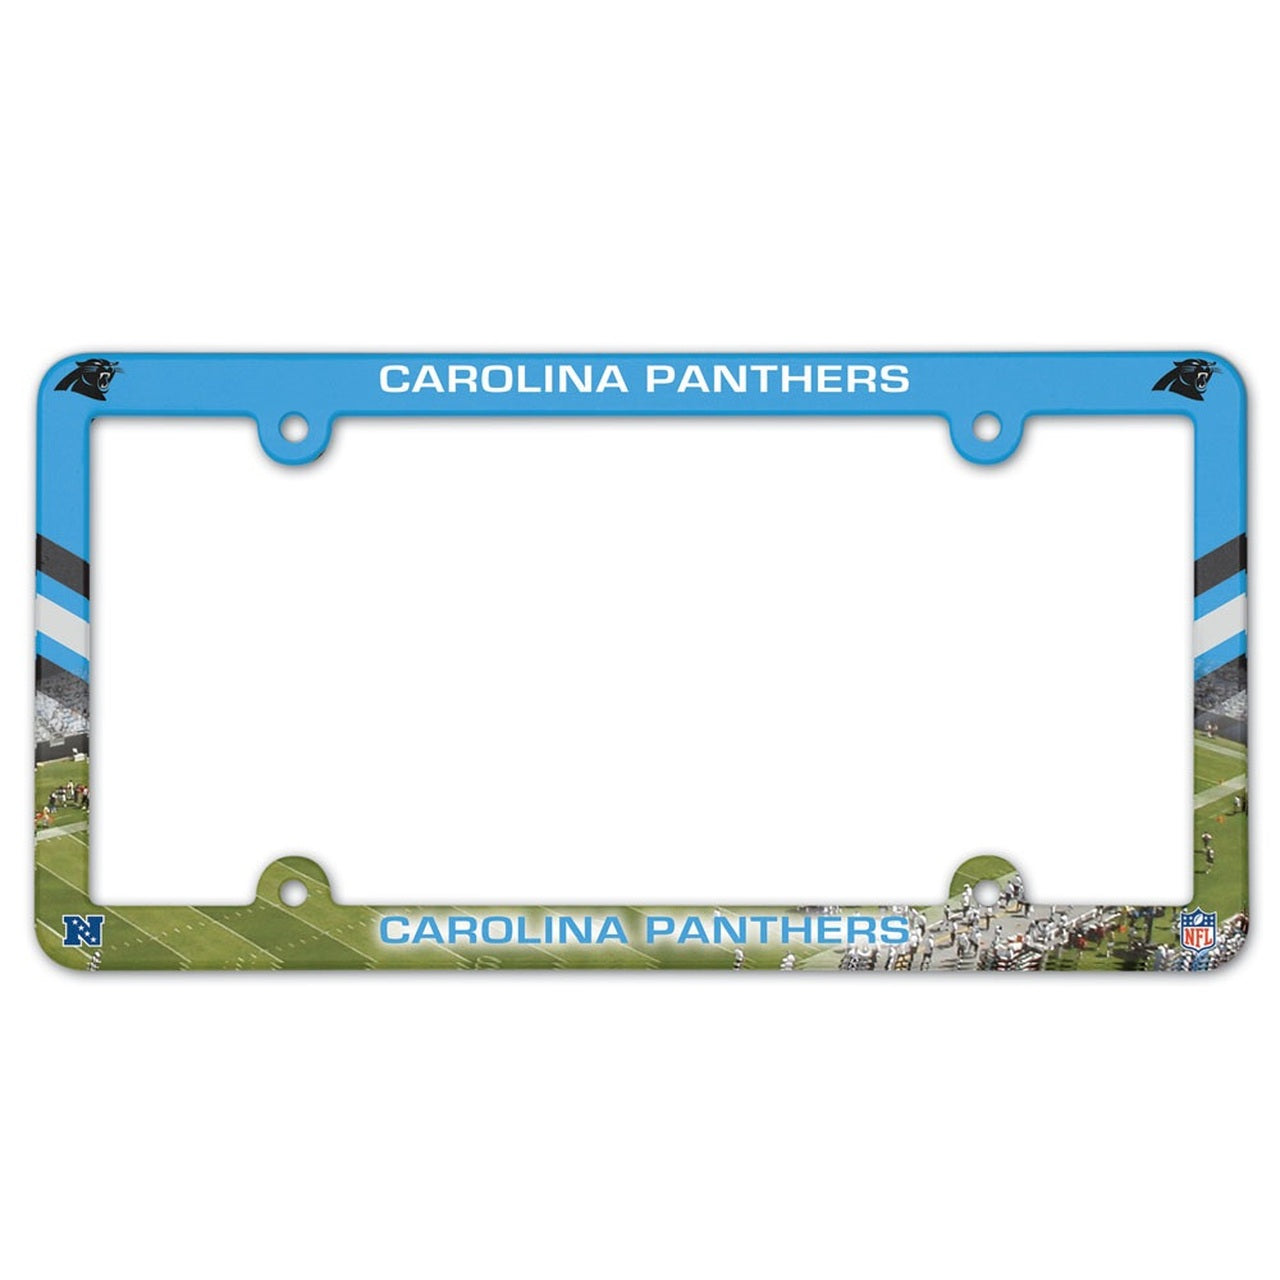 Carolina Panthers Full Color Plastic License Plate Frame by Wincraft